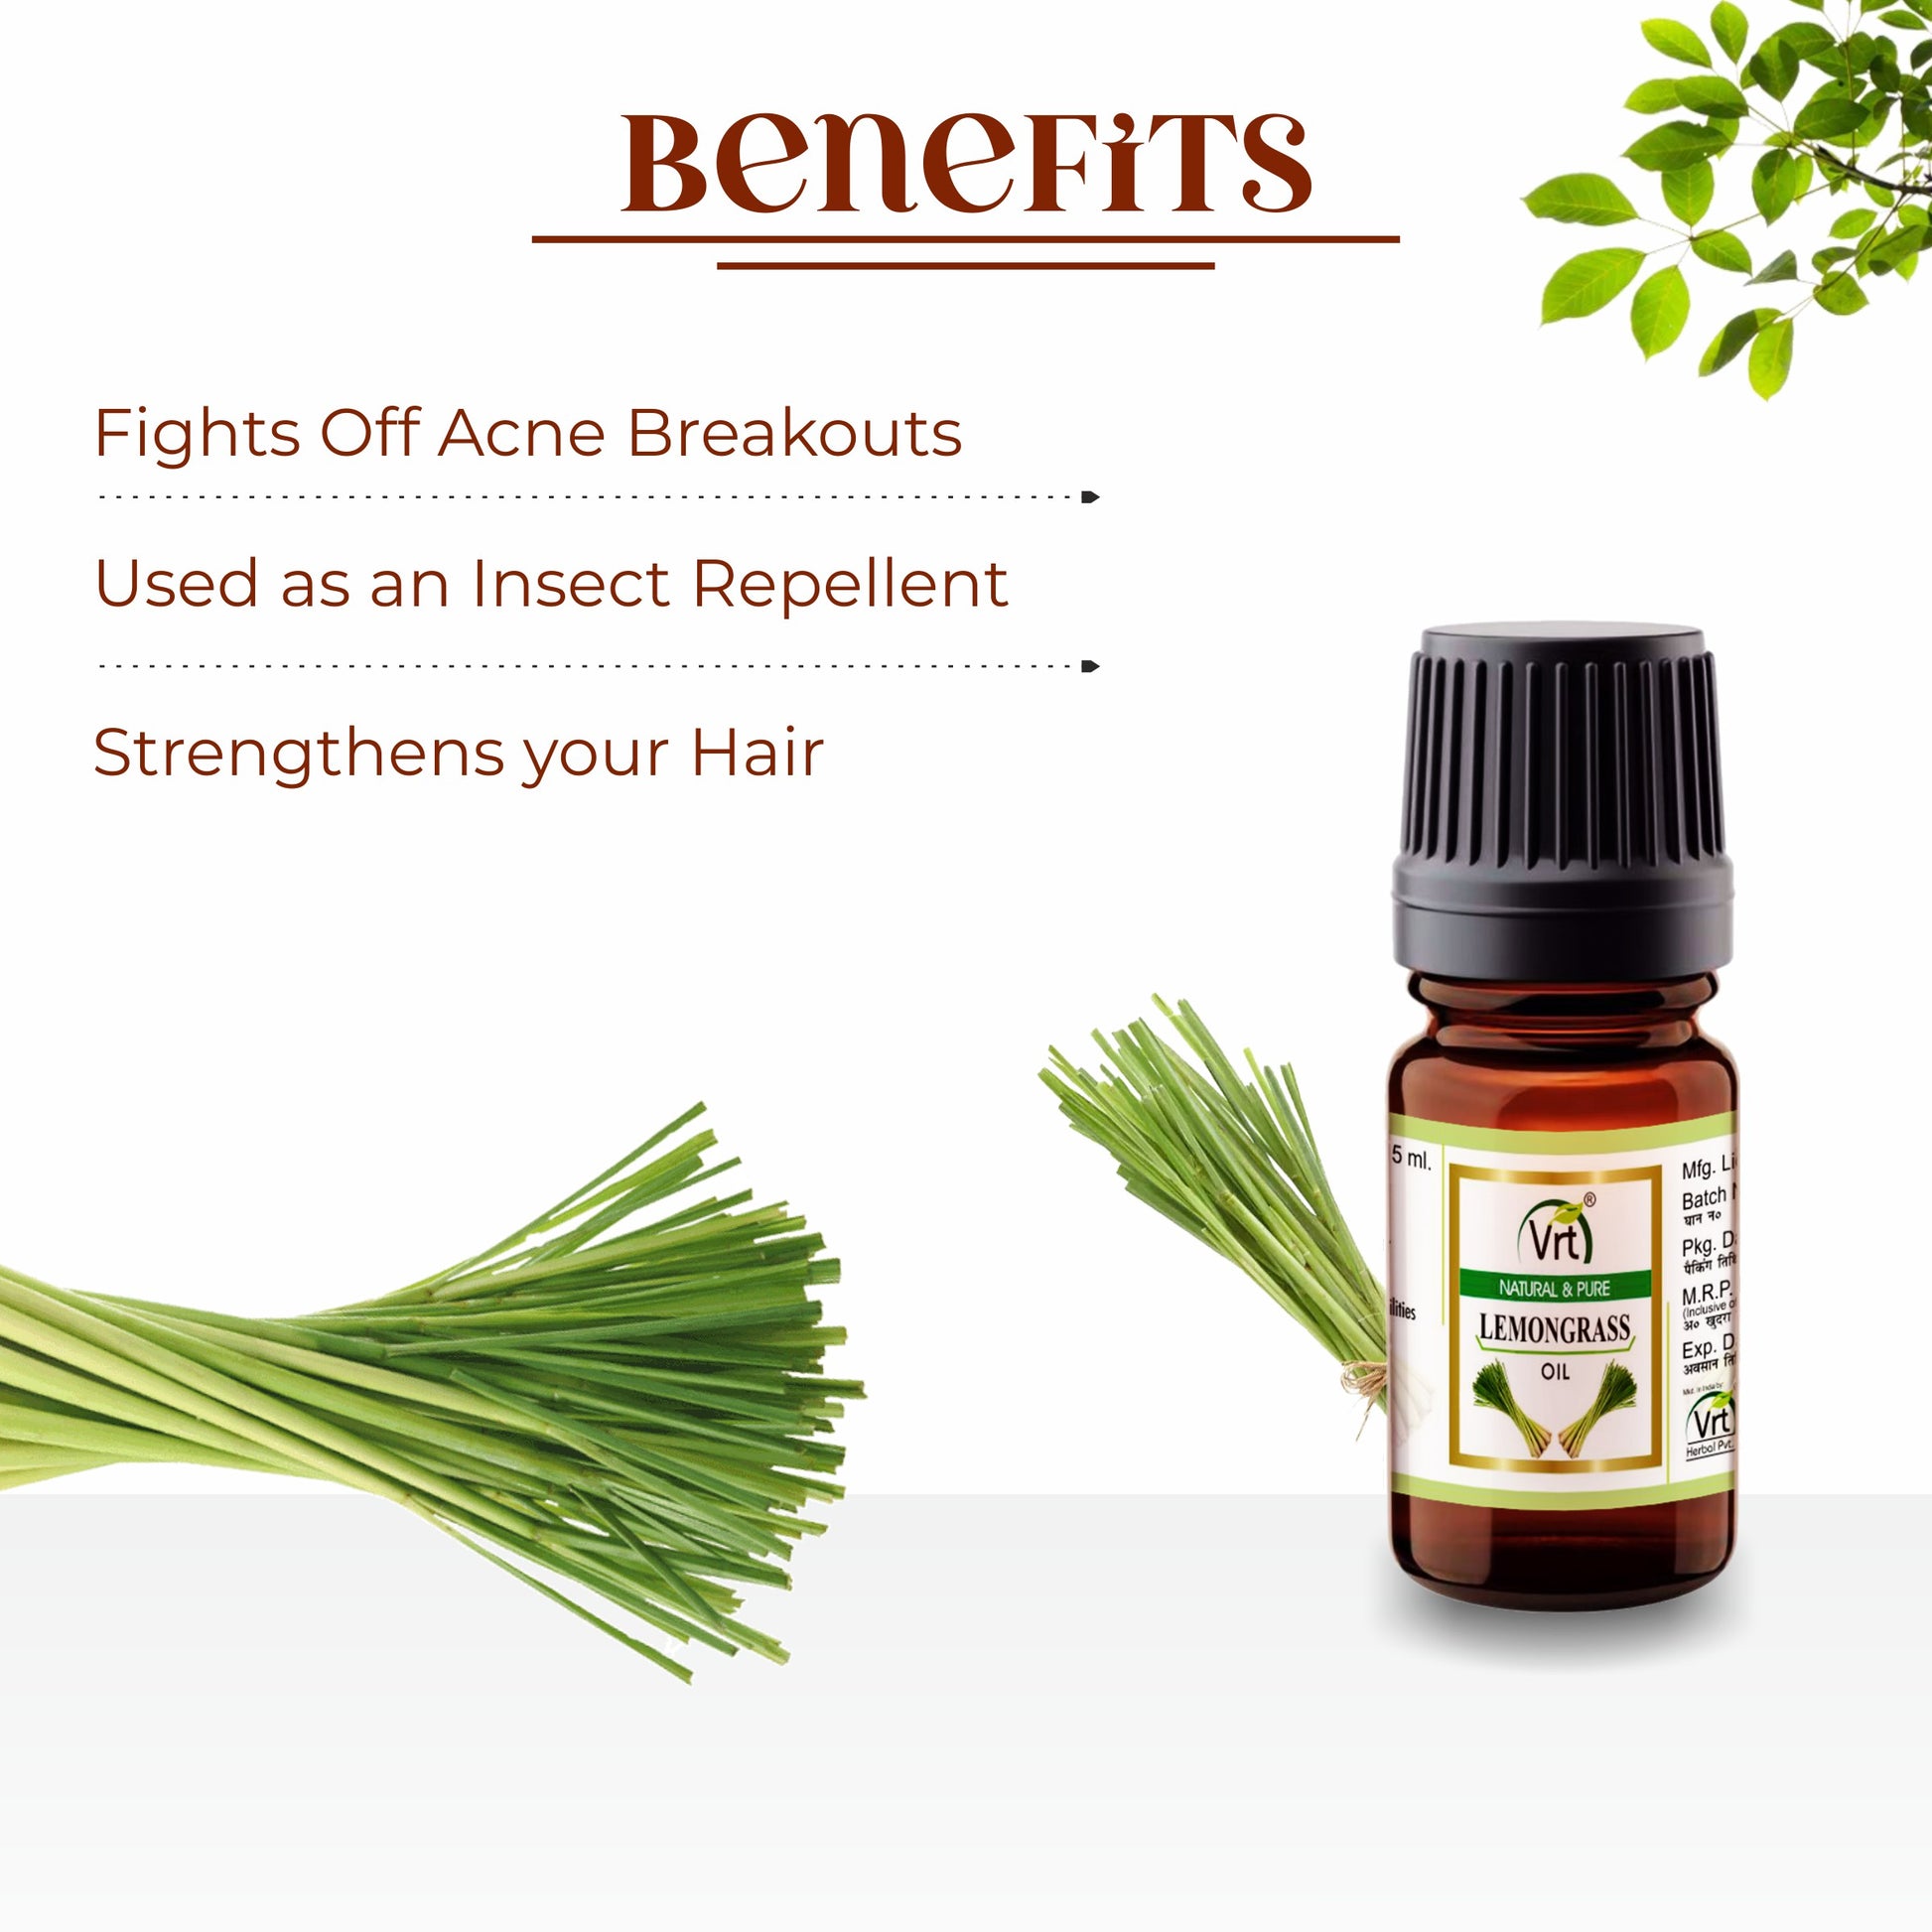 fights off acne, insect repelient, strengthens your hair, 15ml bottle, 